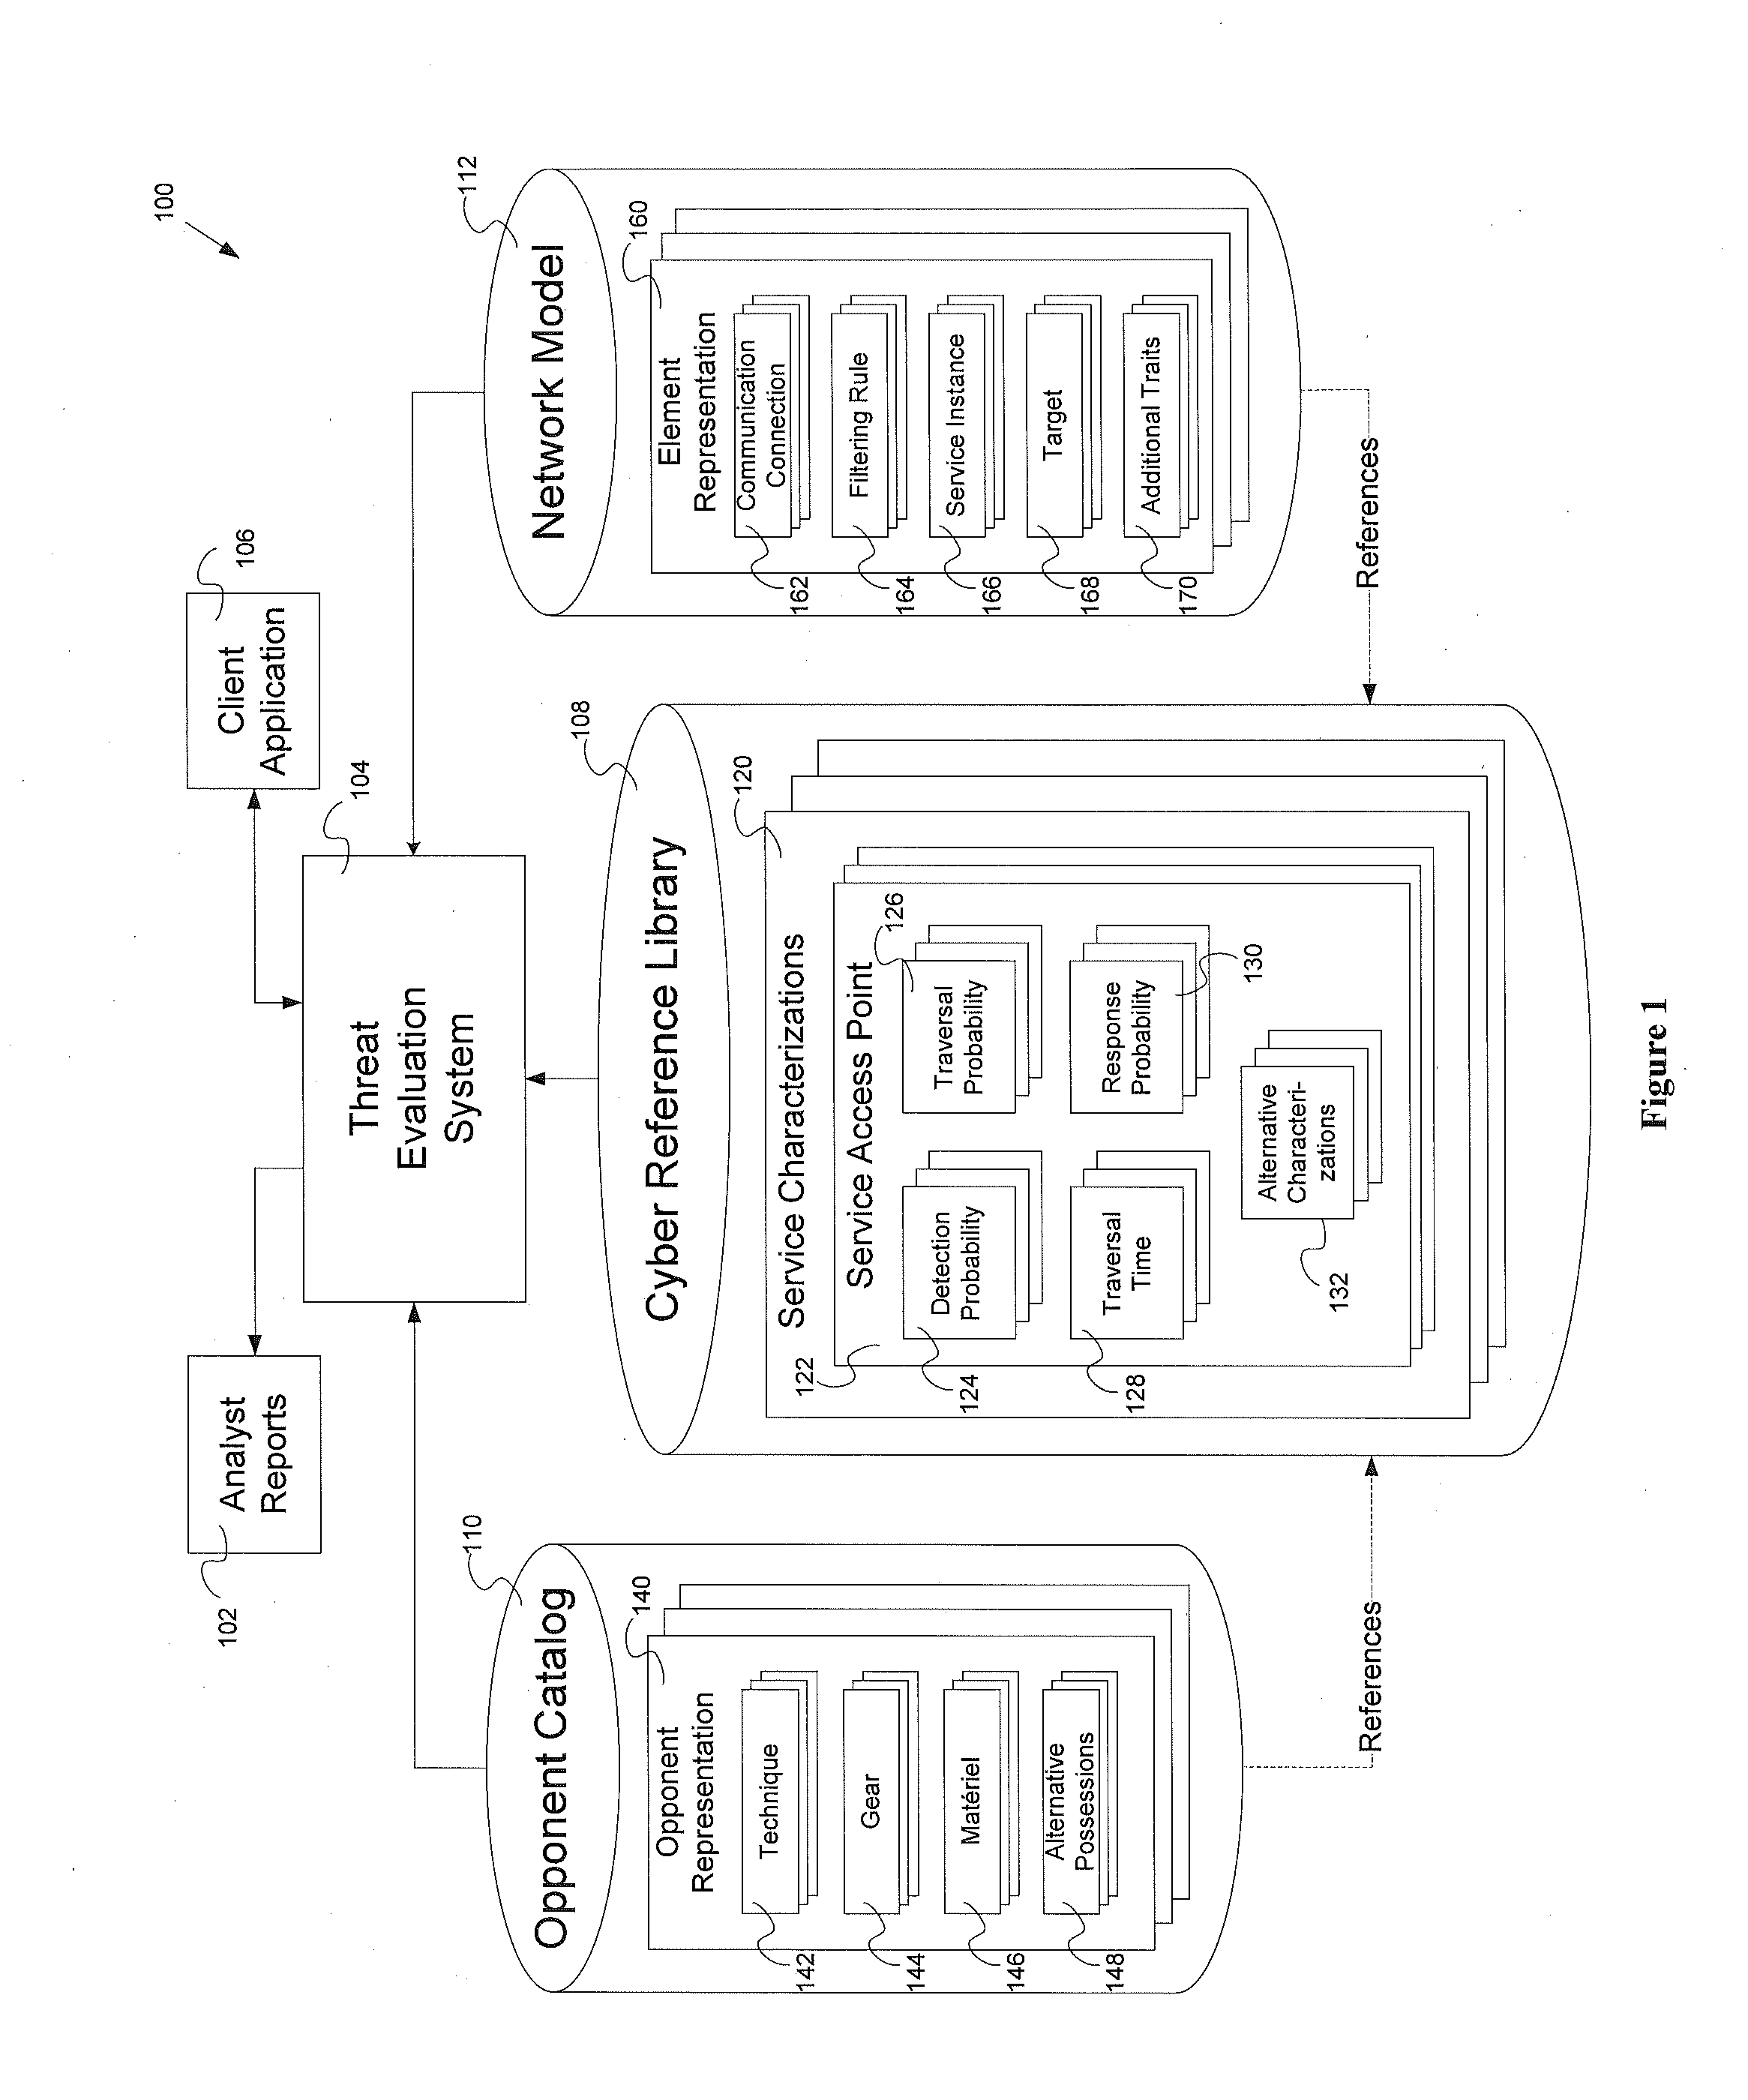 Threat evaluation system and method